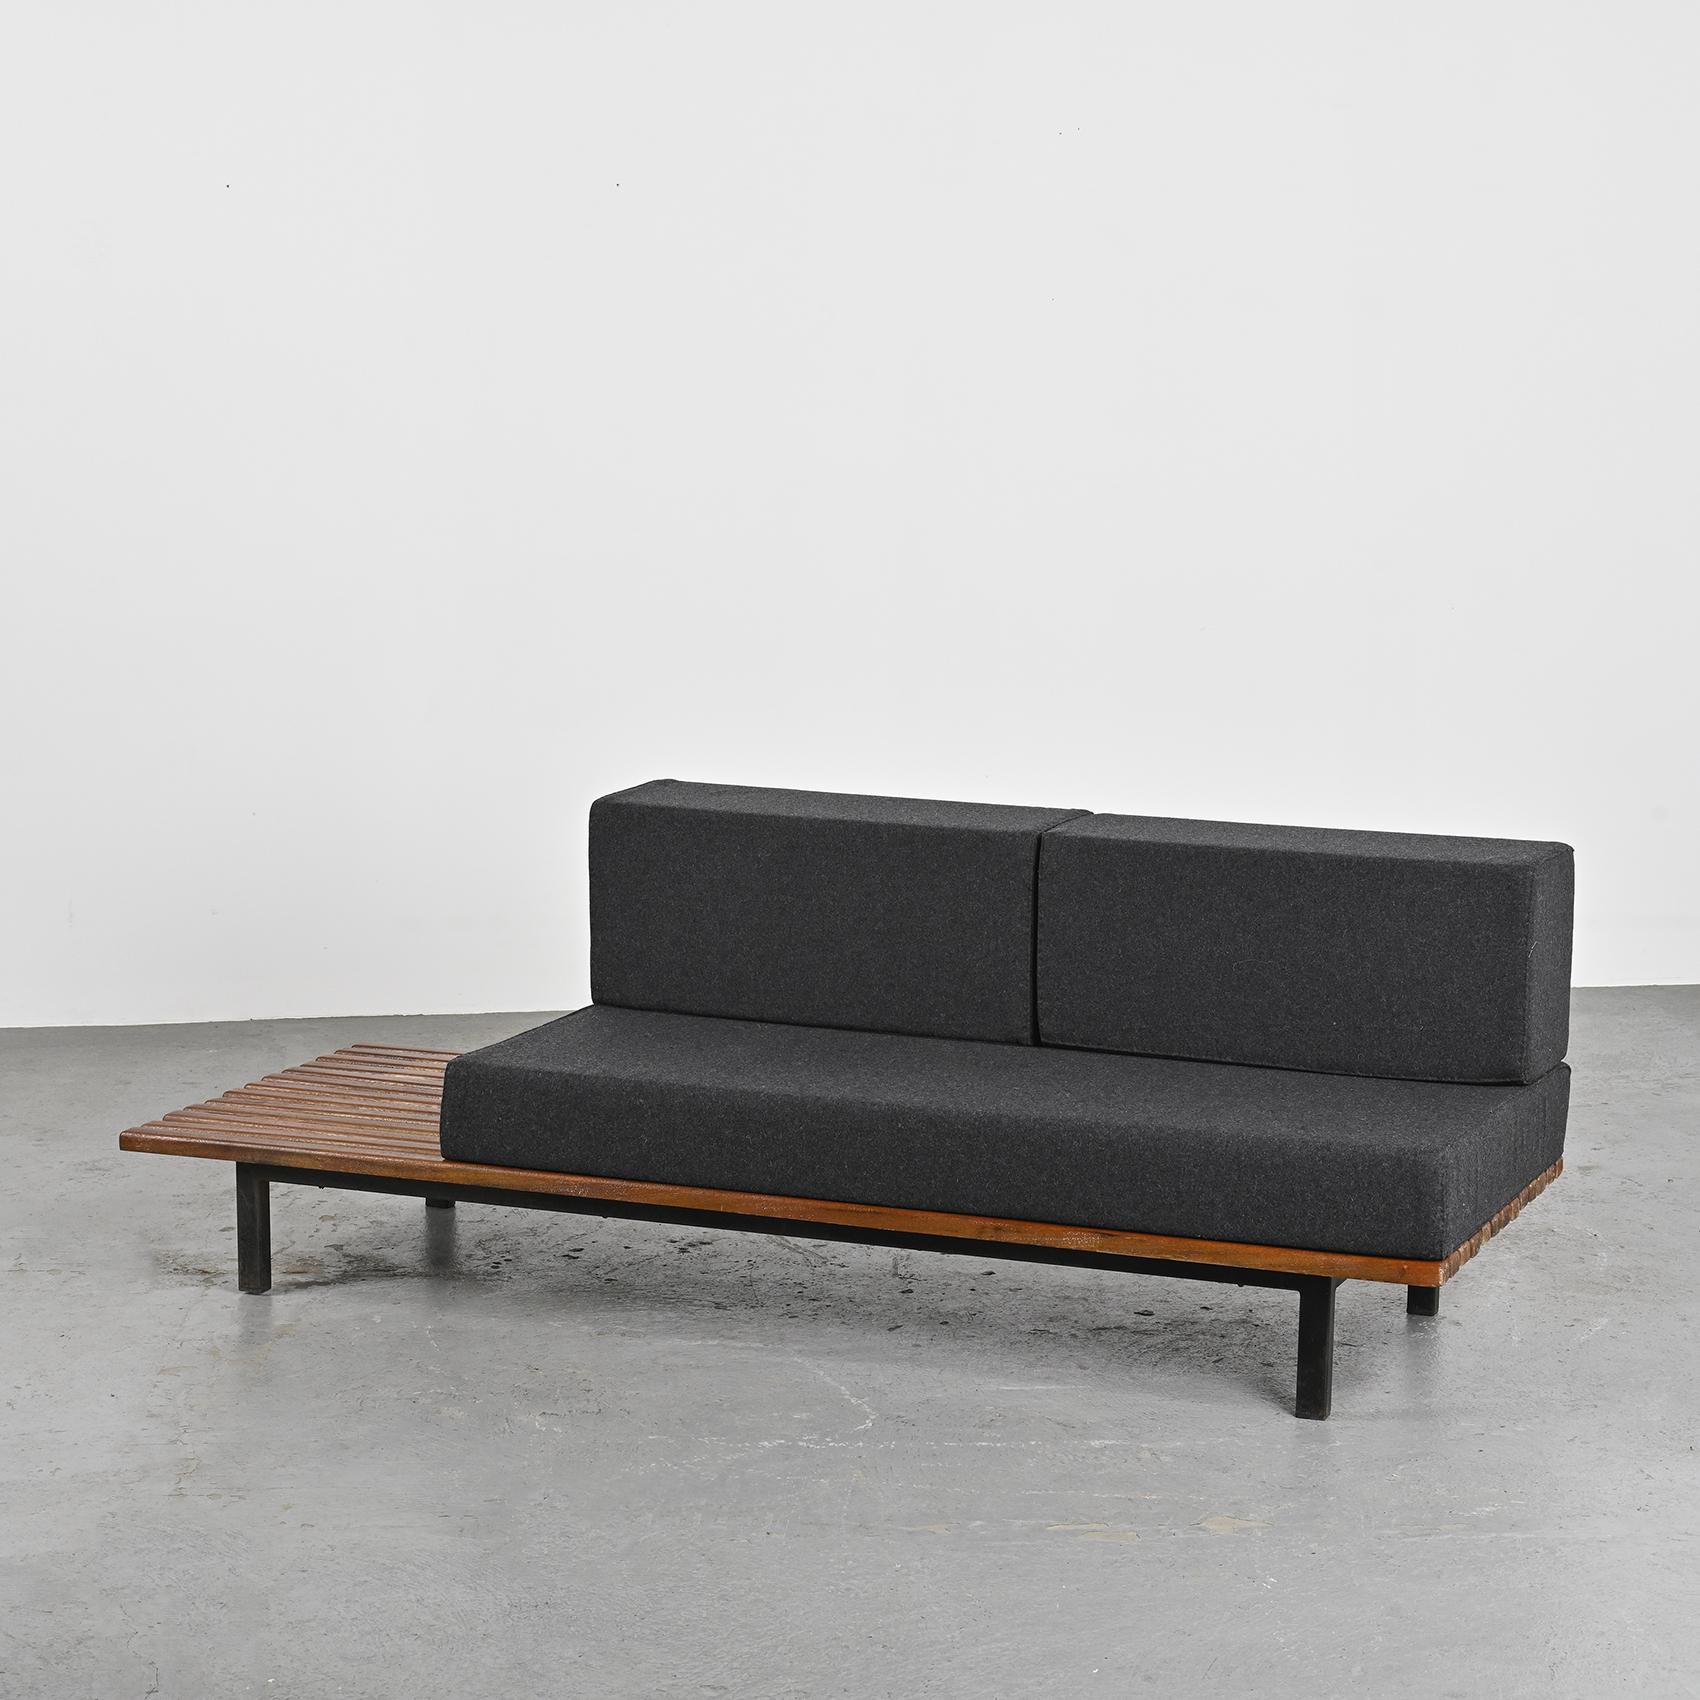 By Charlotte Perriand, a thirteen mahogany slats bench resting on black lacquered metal legs. It can also be stunning as a low table in a living room.

The mattress and cushions have be renovated in dark grey Nobilis woolen cloth.

Cansado is a